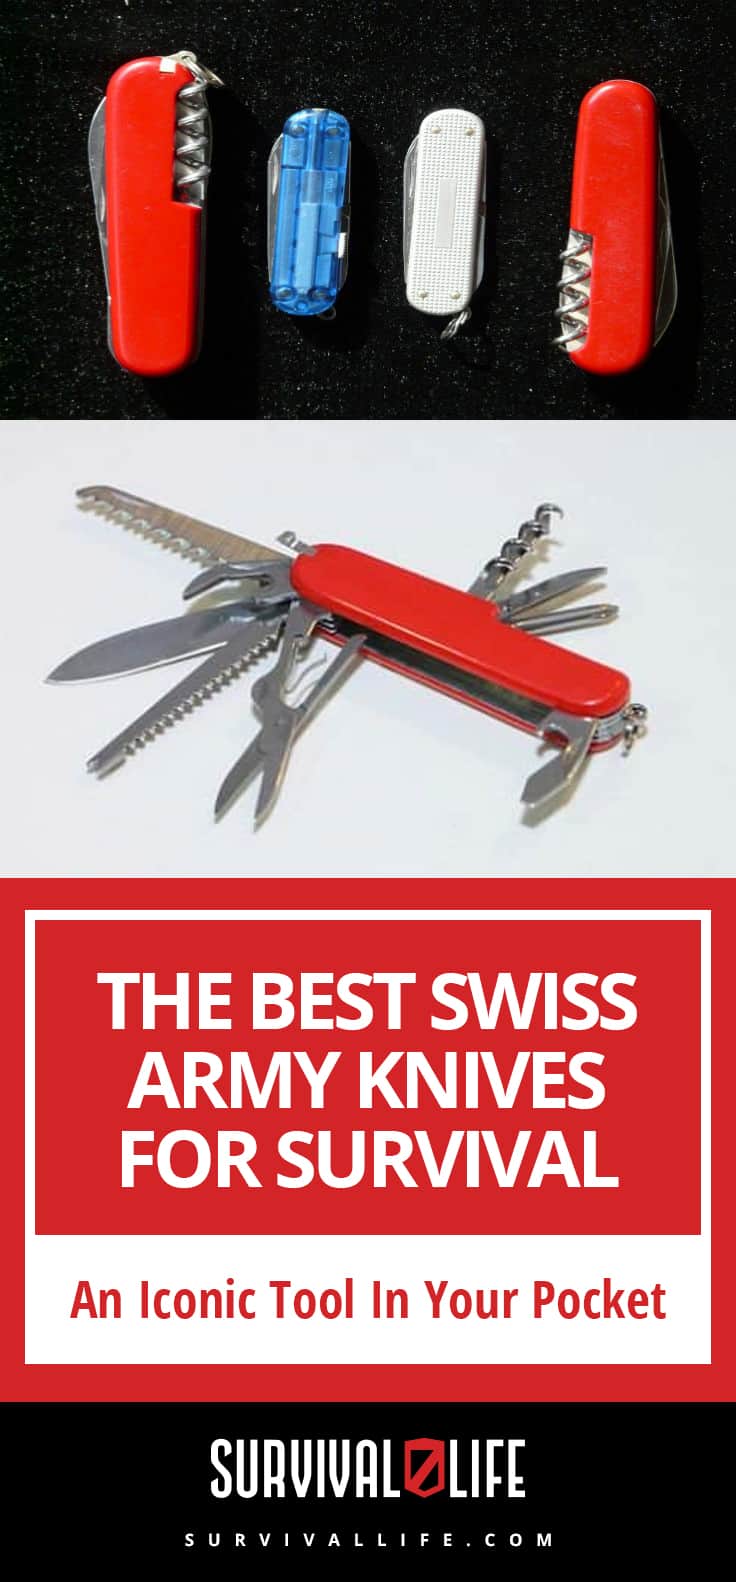 The Best Swiss Army Knives For Survival | An Iconic Tool In Your Pocket